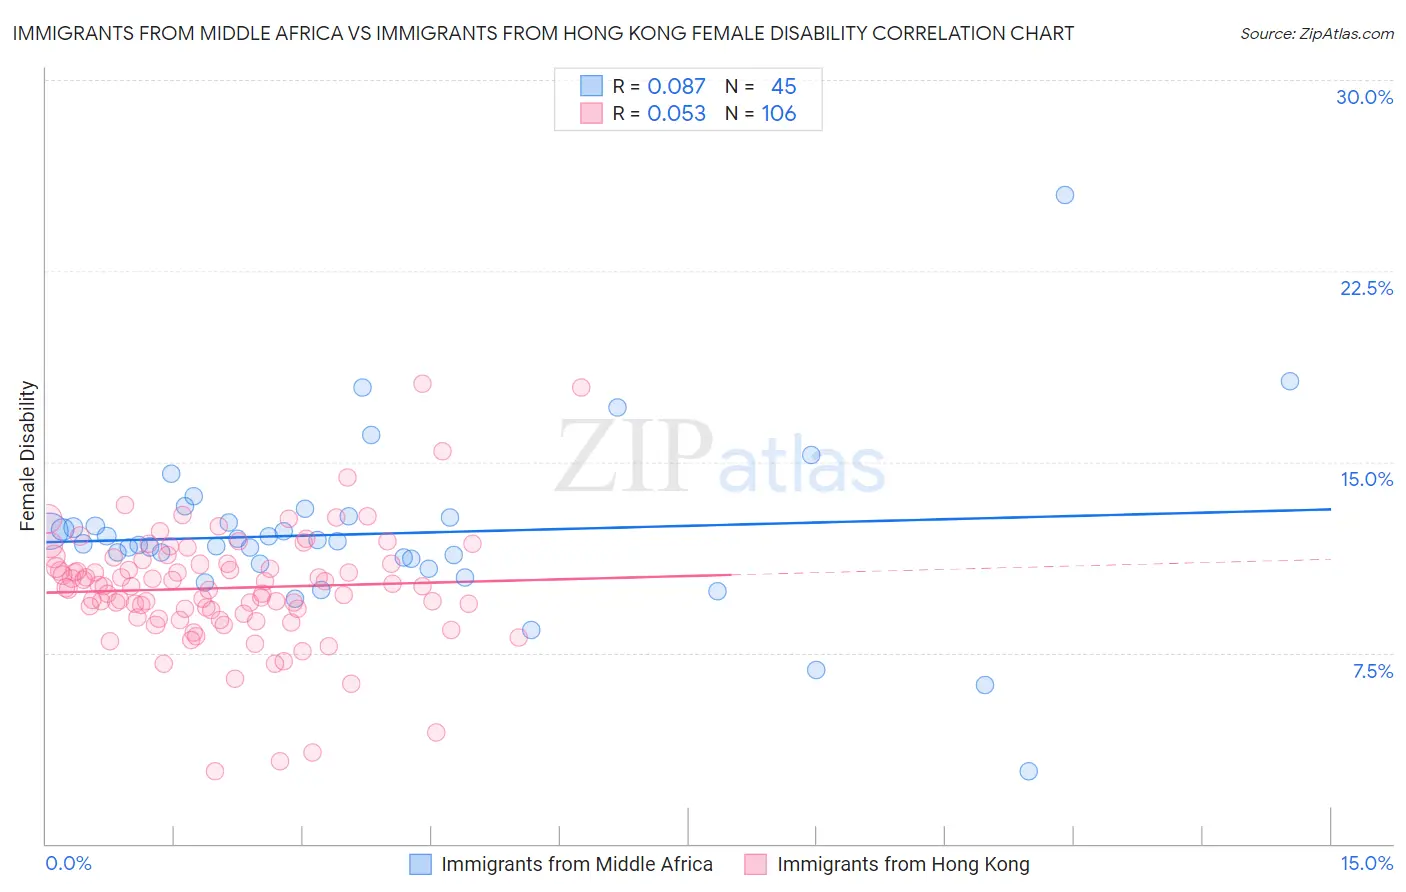 Immigrants from Middle Africa vs Immigrants from Hong Kong Female Disability